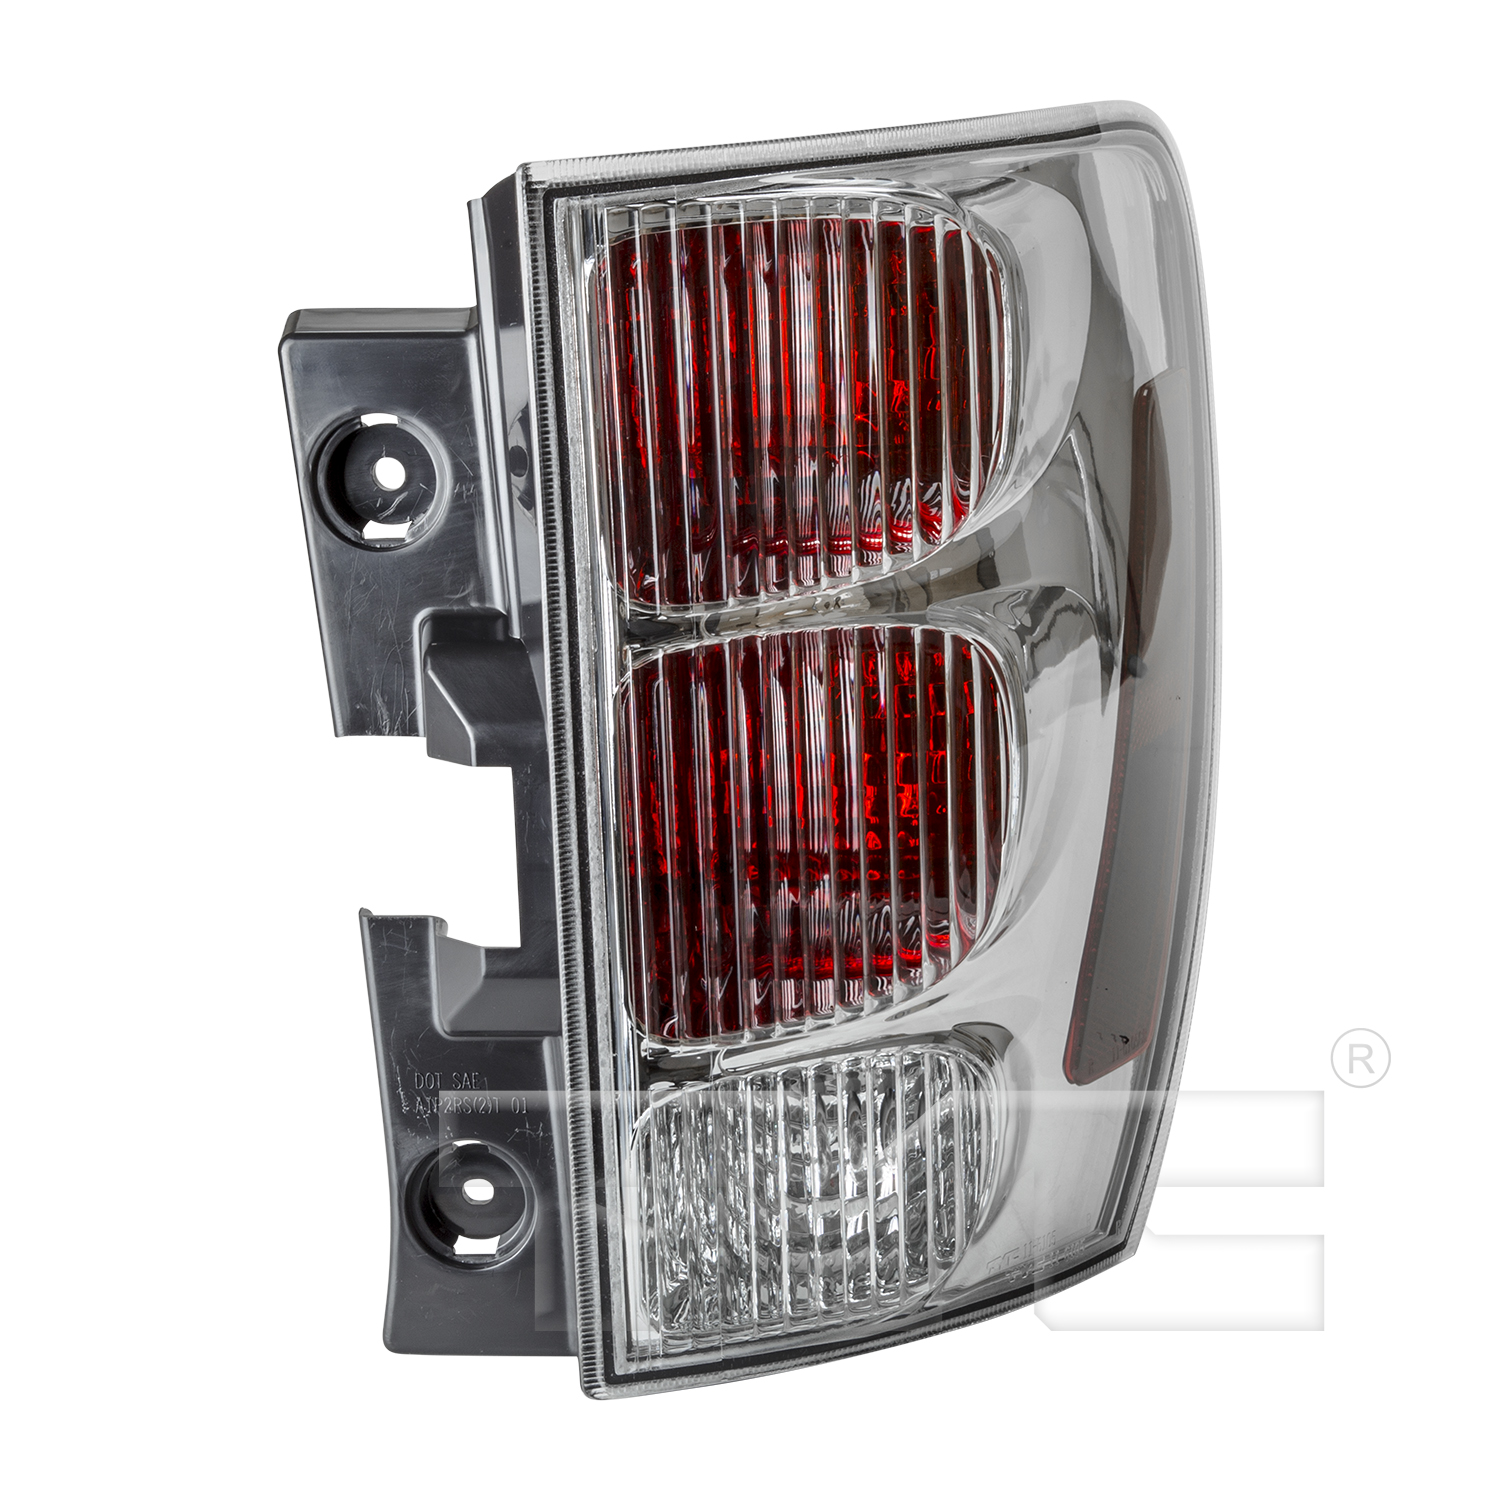 Aftermarket TAILLIGHTS for CHEVROLET - EQUINOX, EQUINOX,05-09,RT Taillamp assy